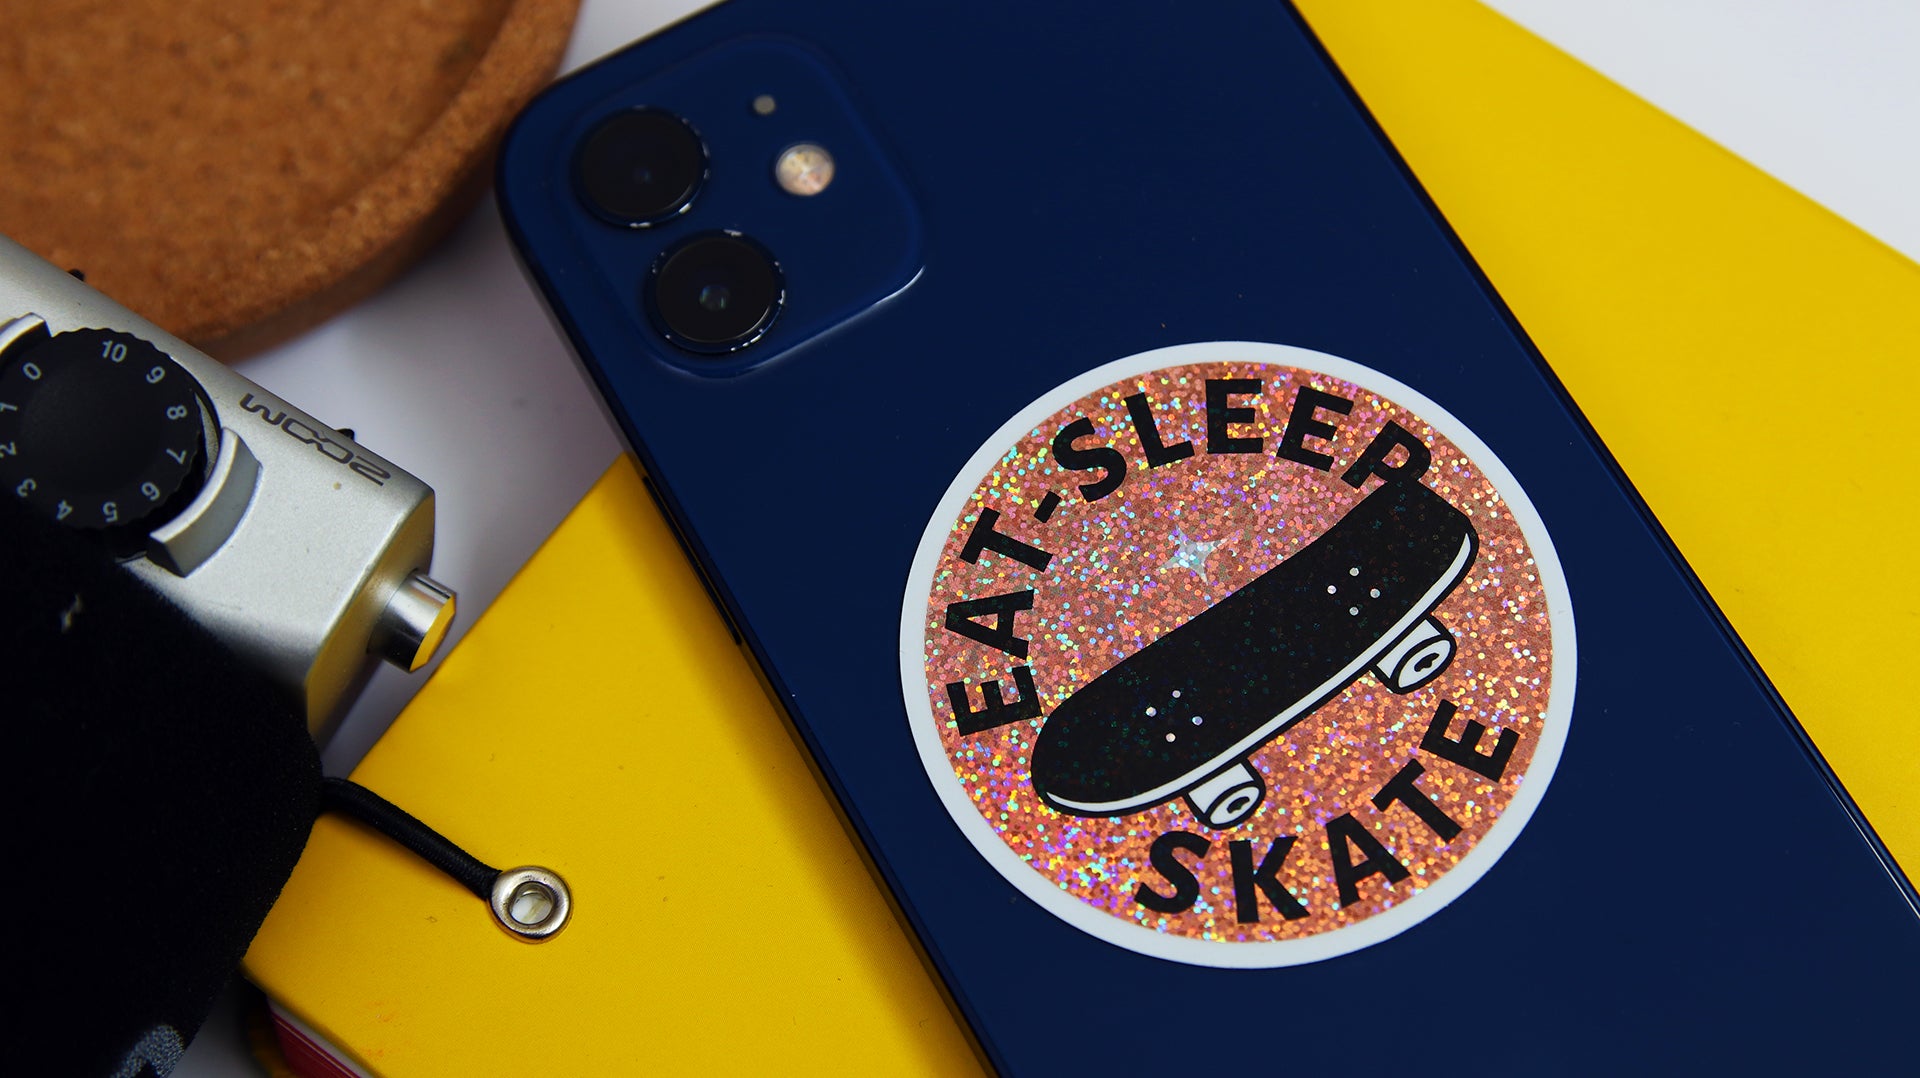 Circle eco-friendly glitter sticker with skate design applied to a blue iPhone